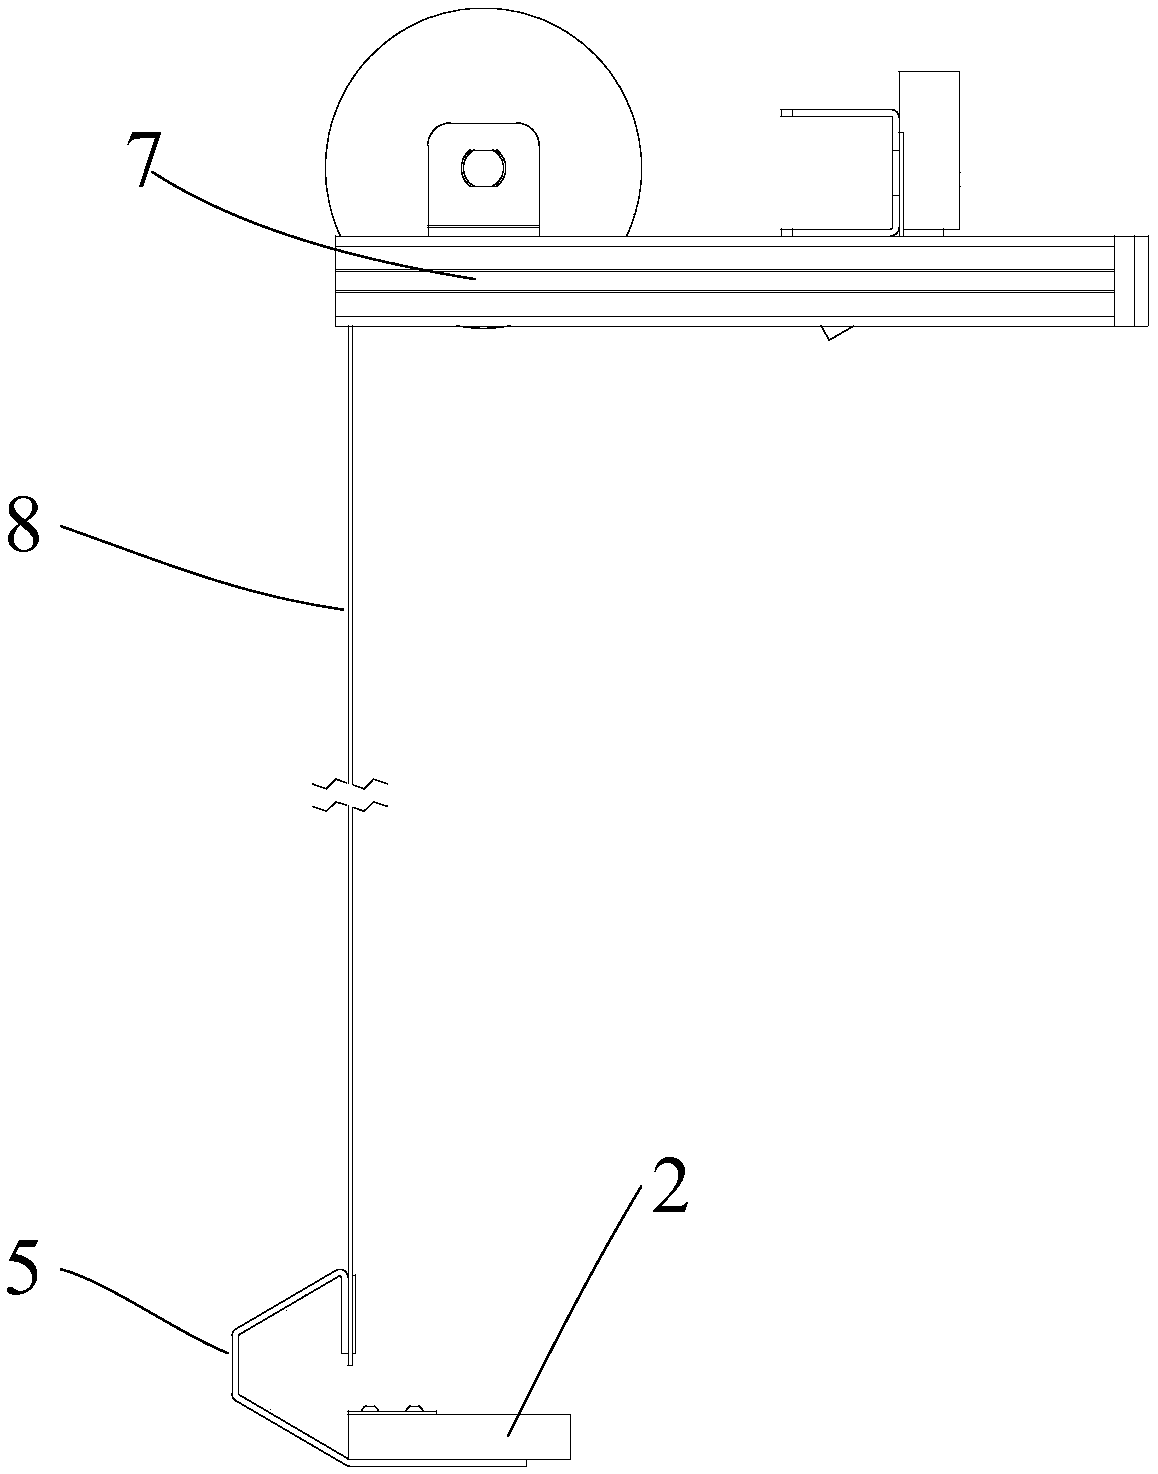 Buffer mechanism and sorting system